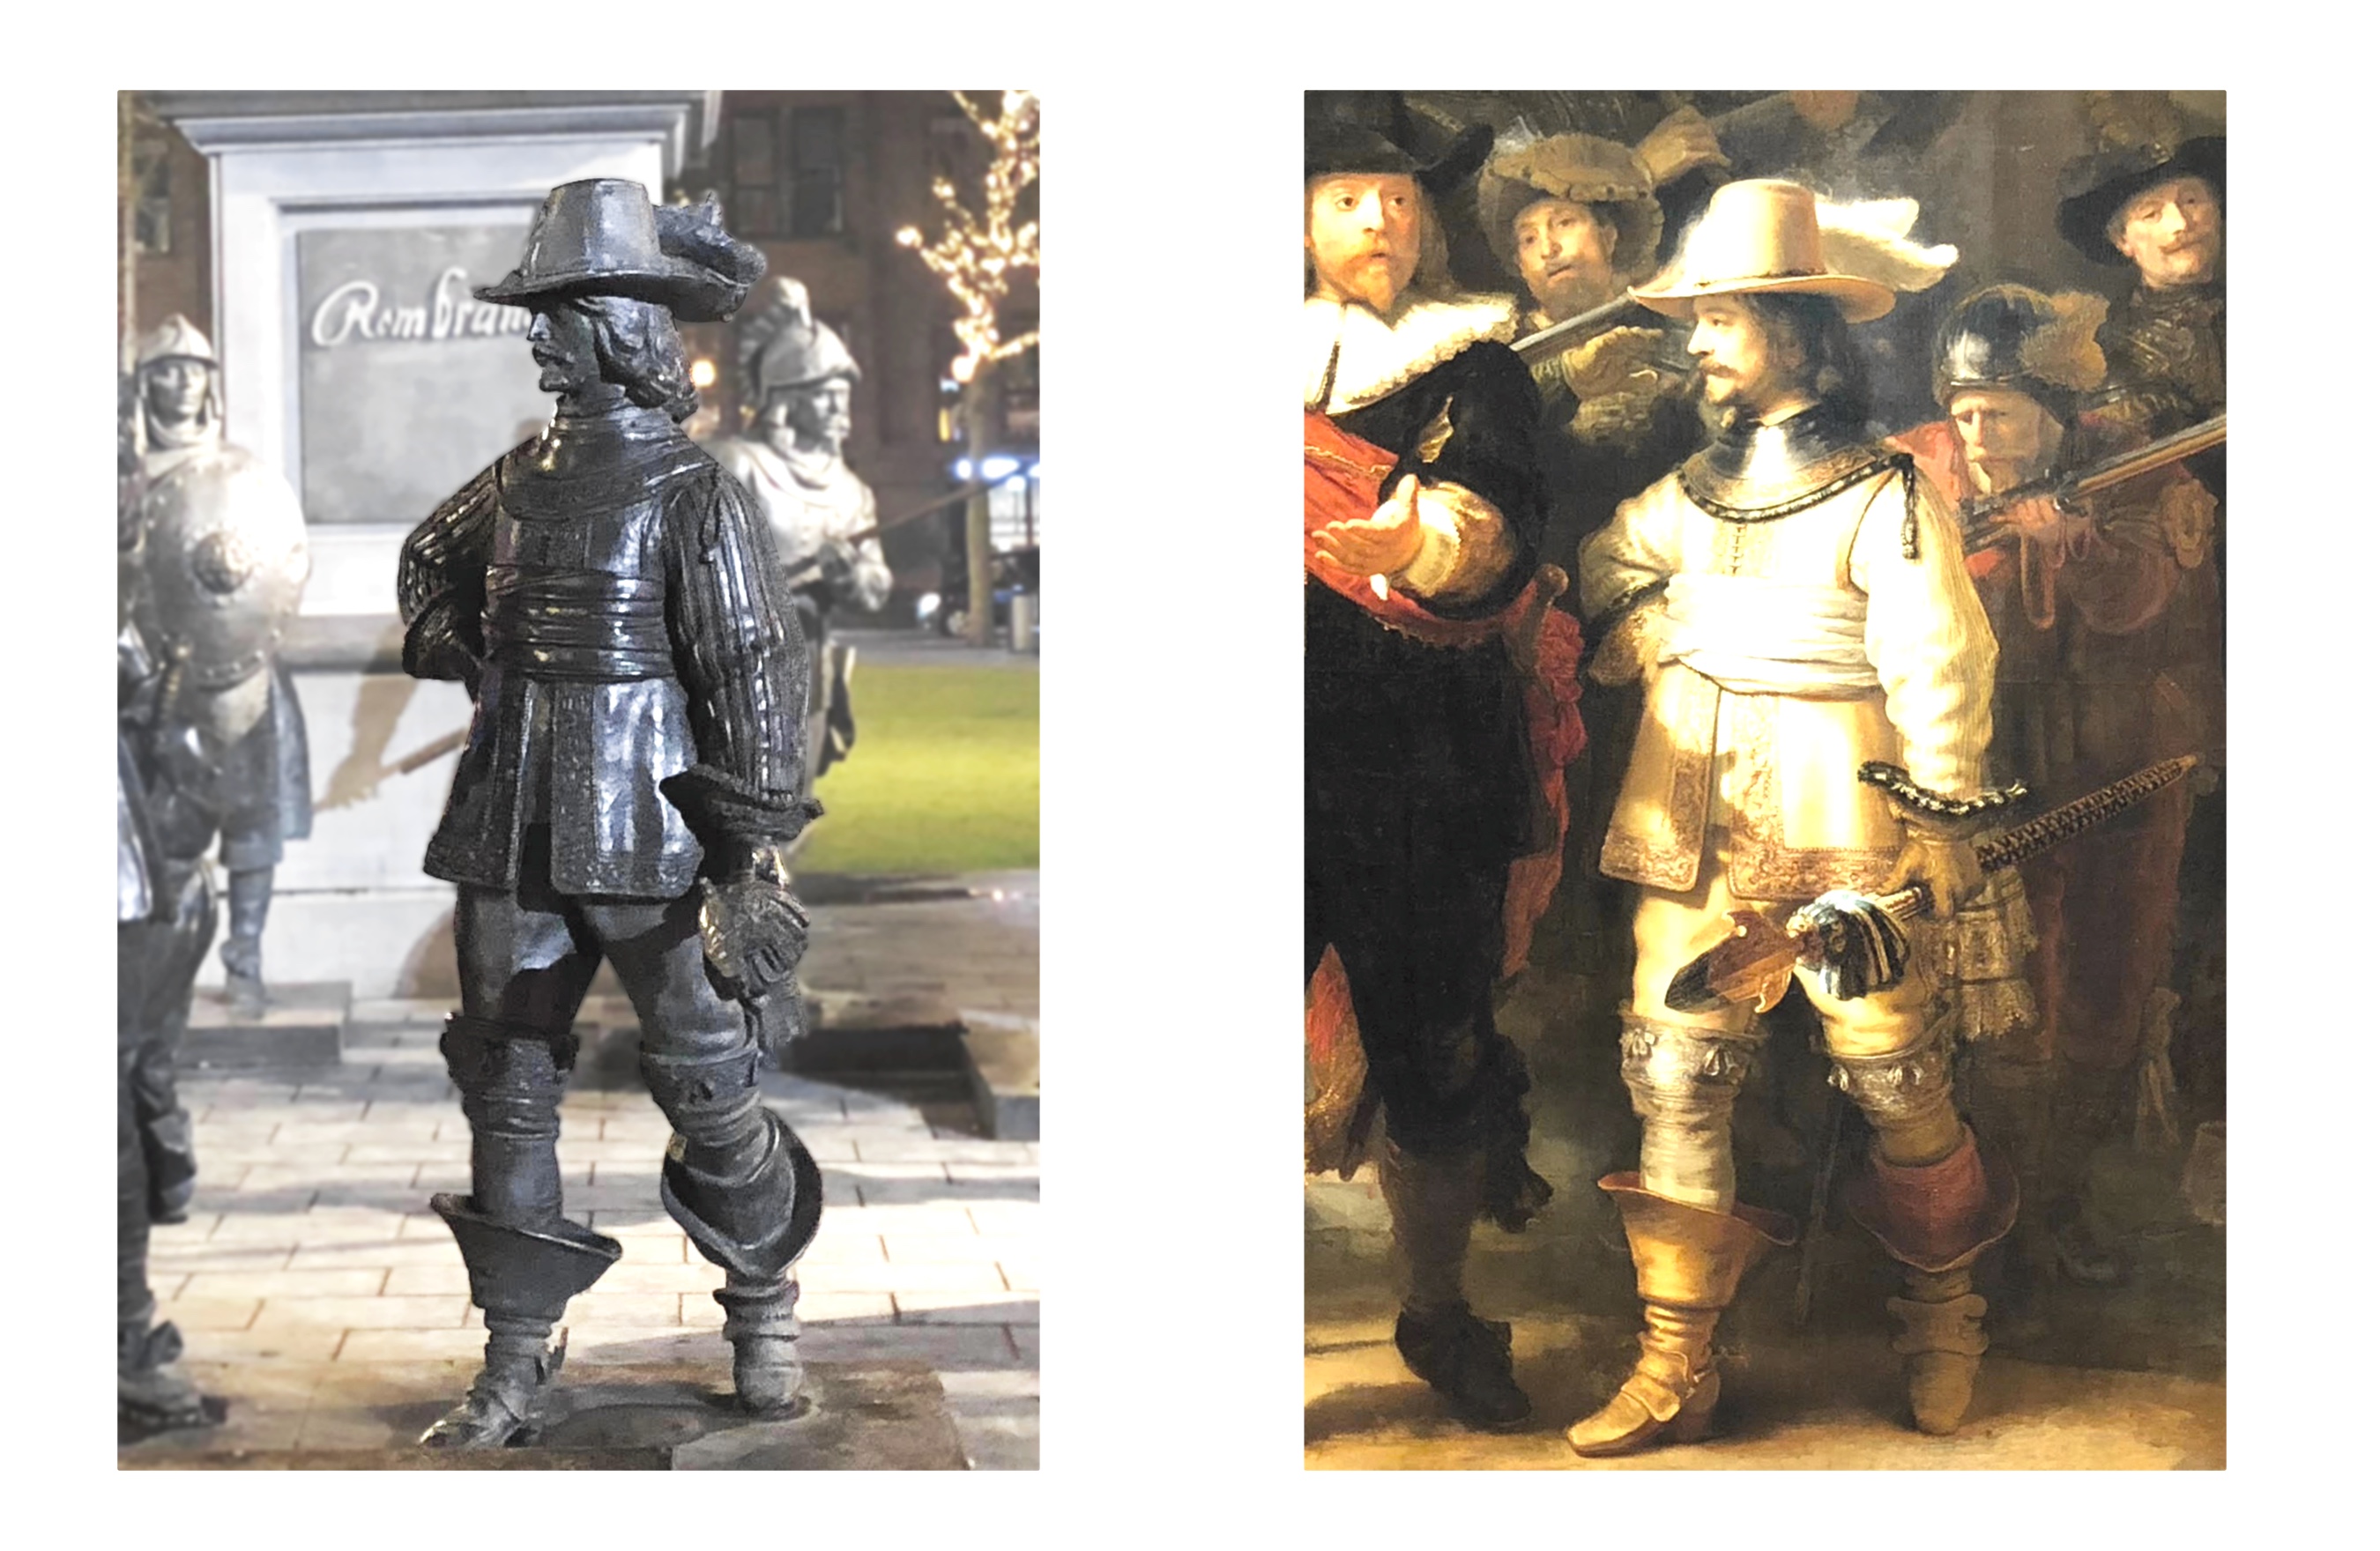 Comparison of the Captain in the painting vs sculpture